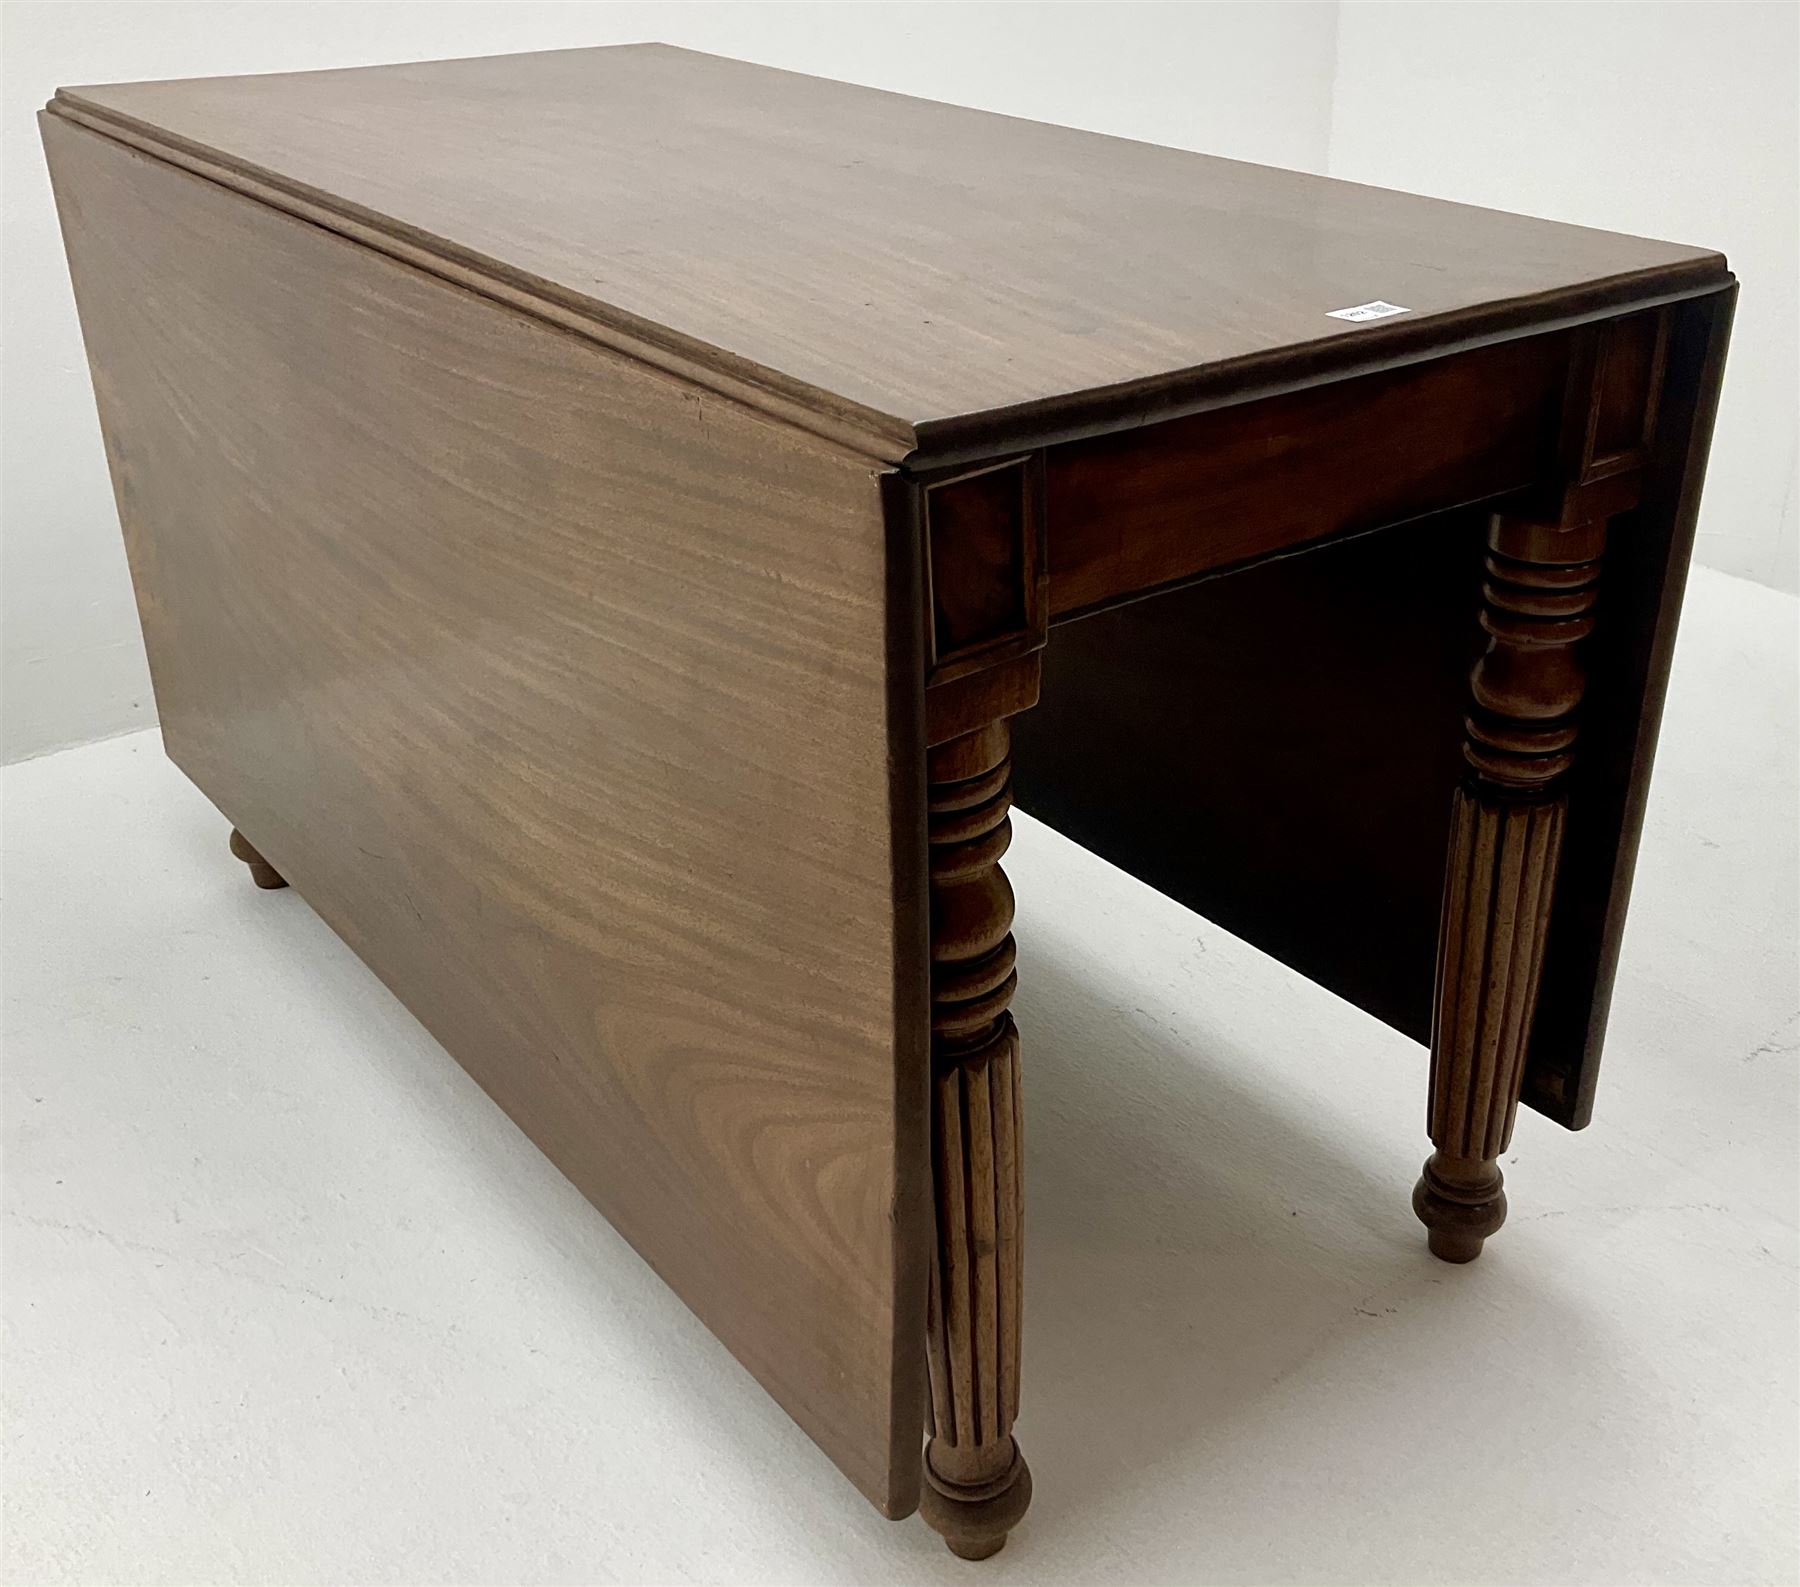 Early 19th century mahogany drop leaf dining table